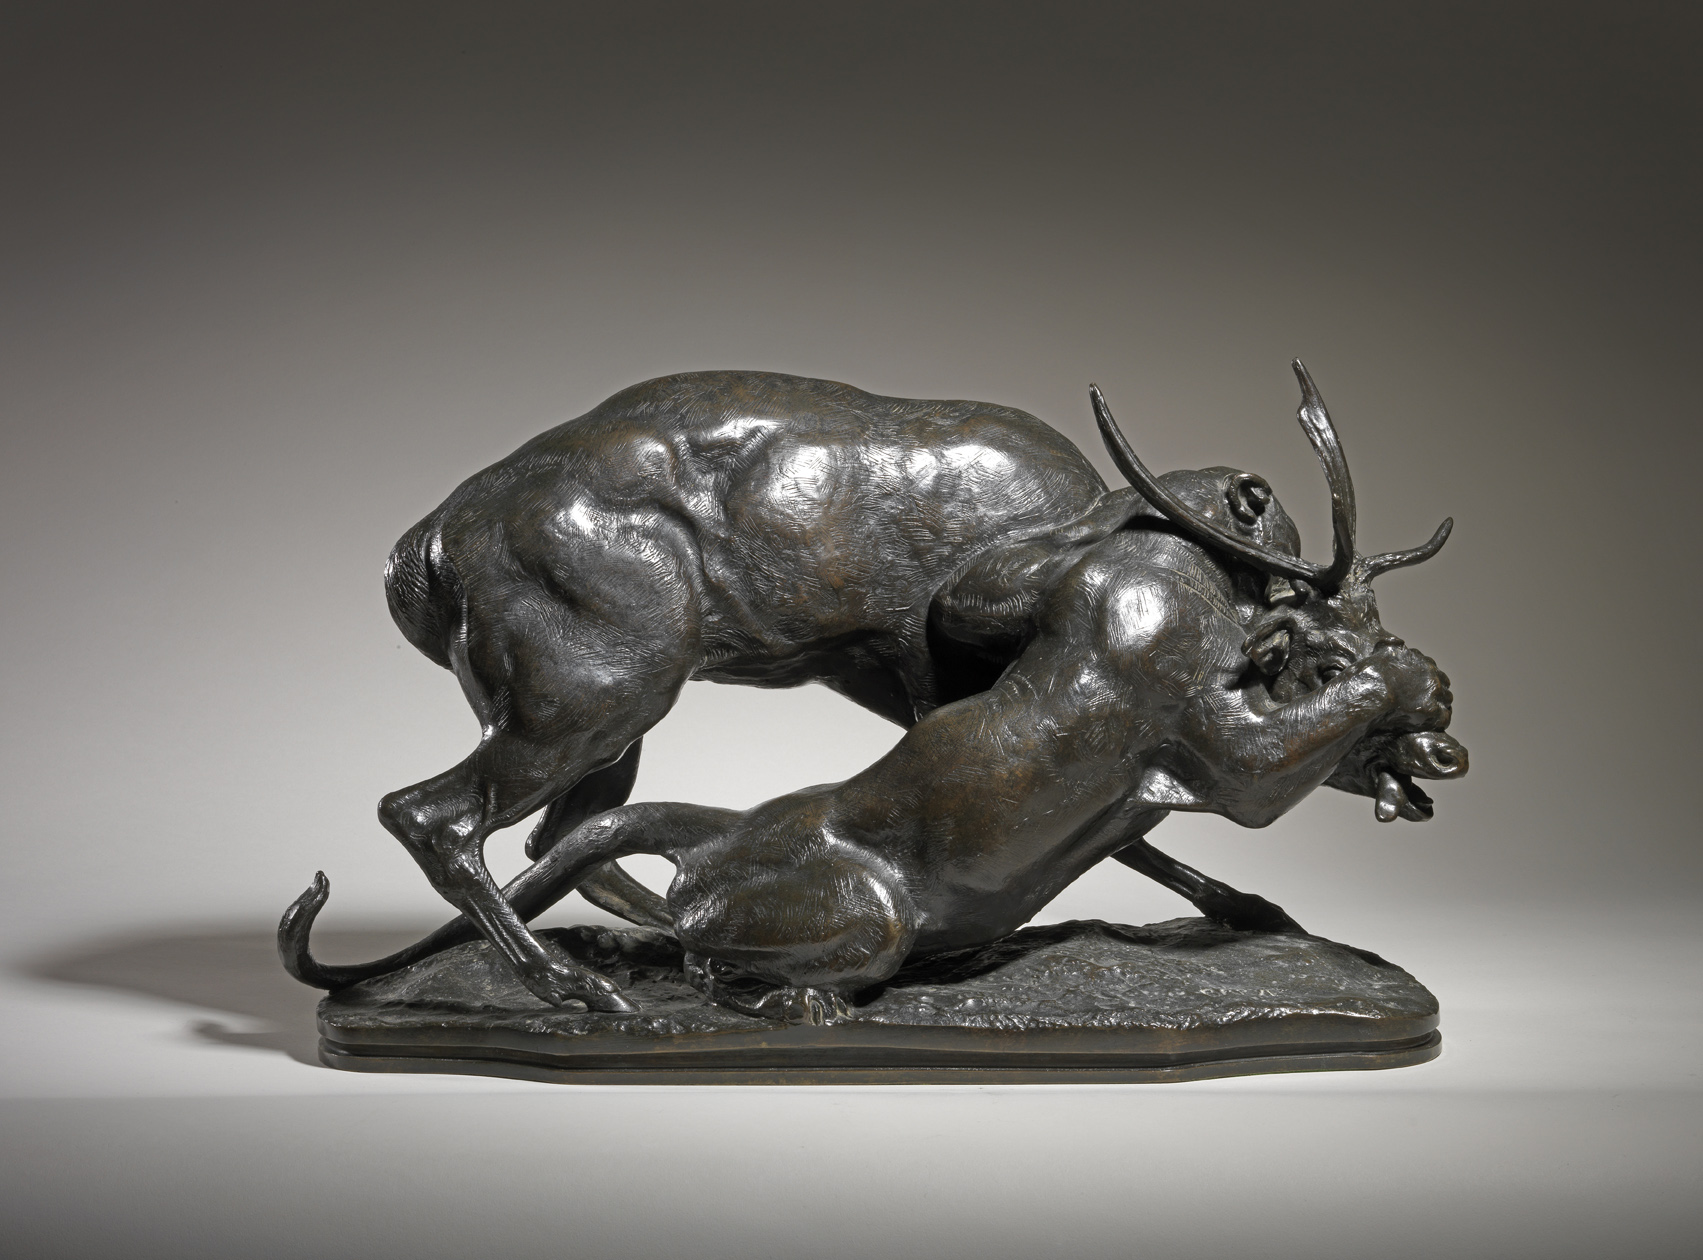 Panther seizing a Stag, c. 1857